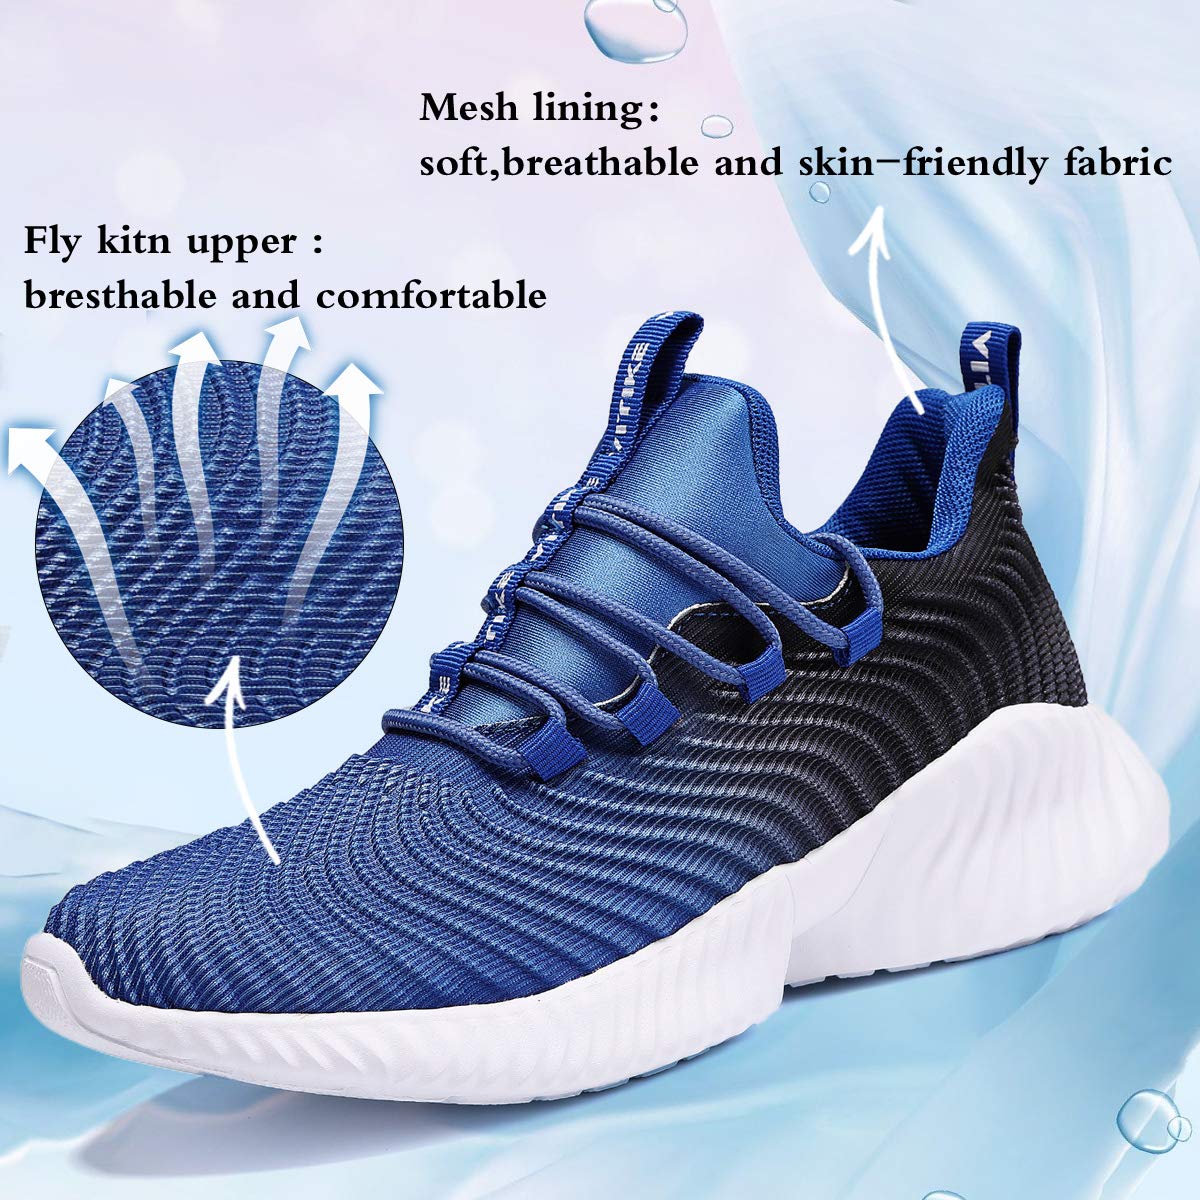 JMFCHI FASHION Boys Running Shoes Kids Sneakers Girls Athletic Tennis Shoe Breathable Lightweight Slip on Sports Knit Sock Sneaker High-top